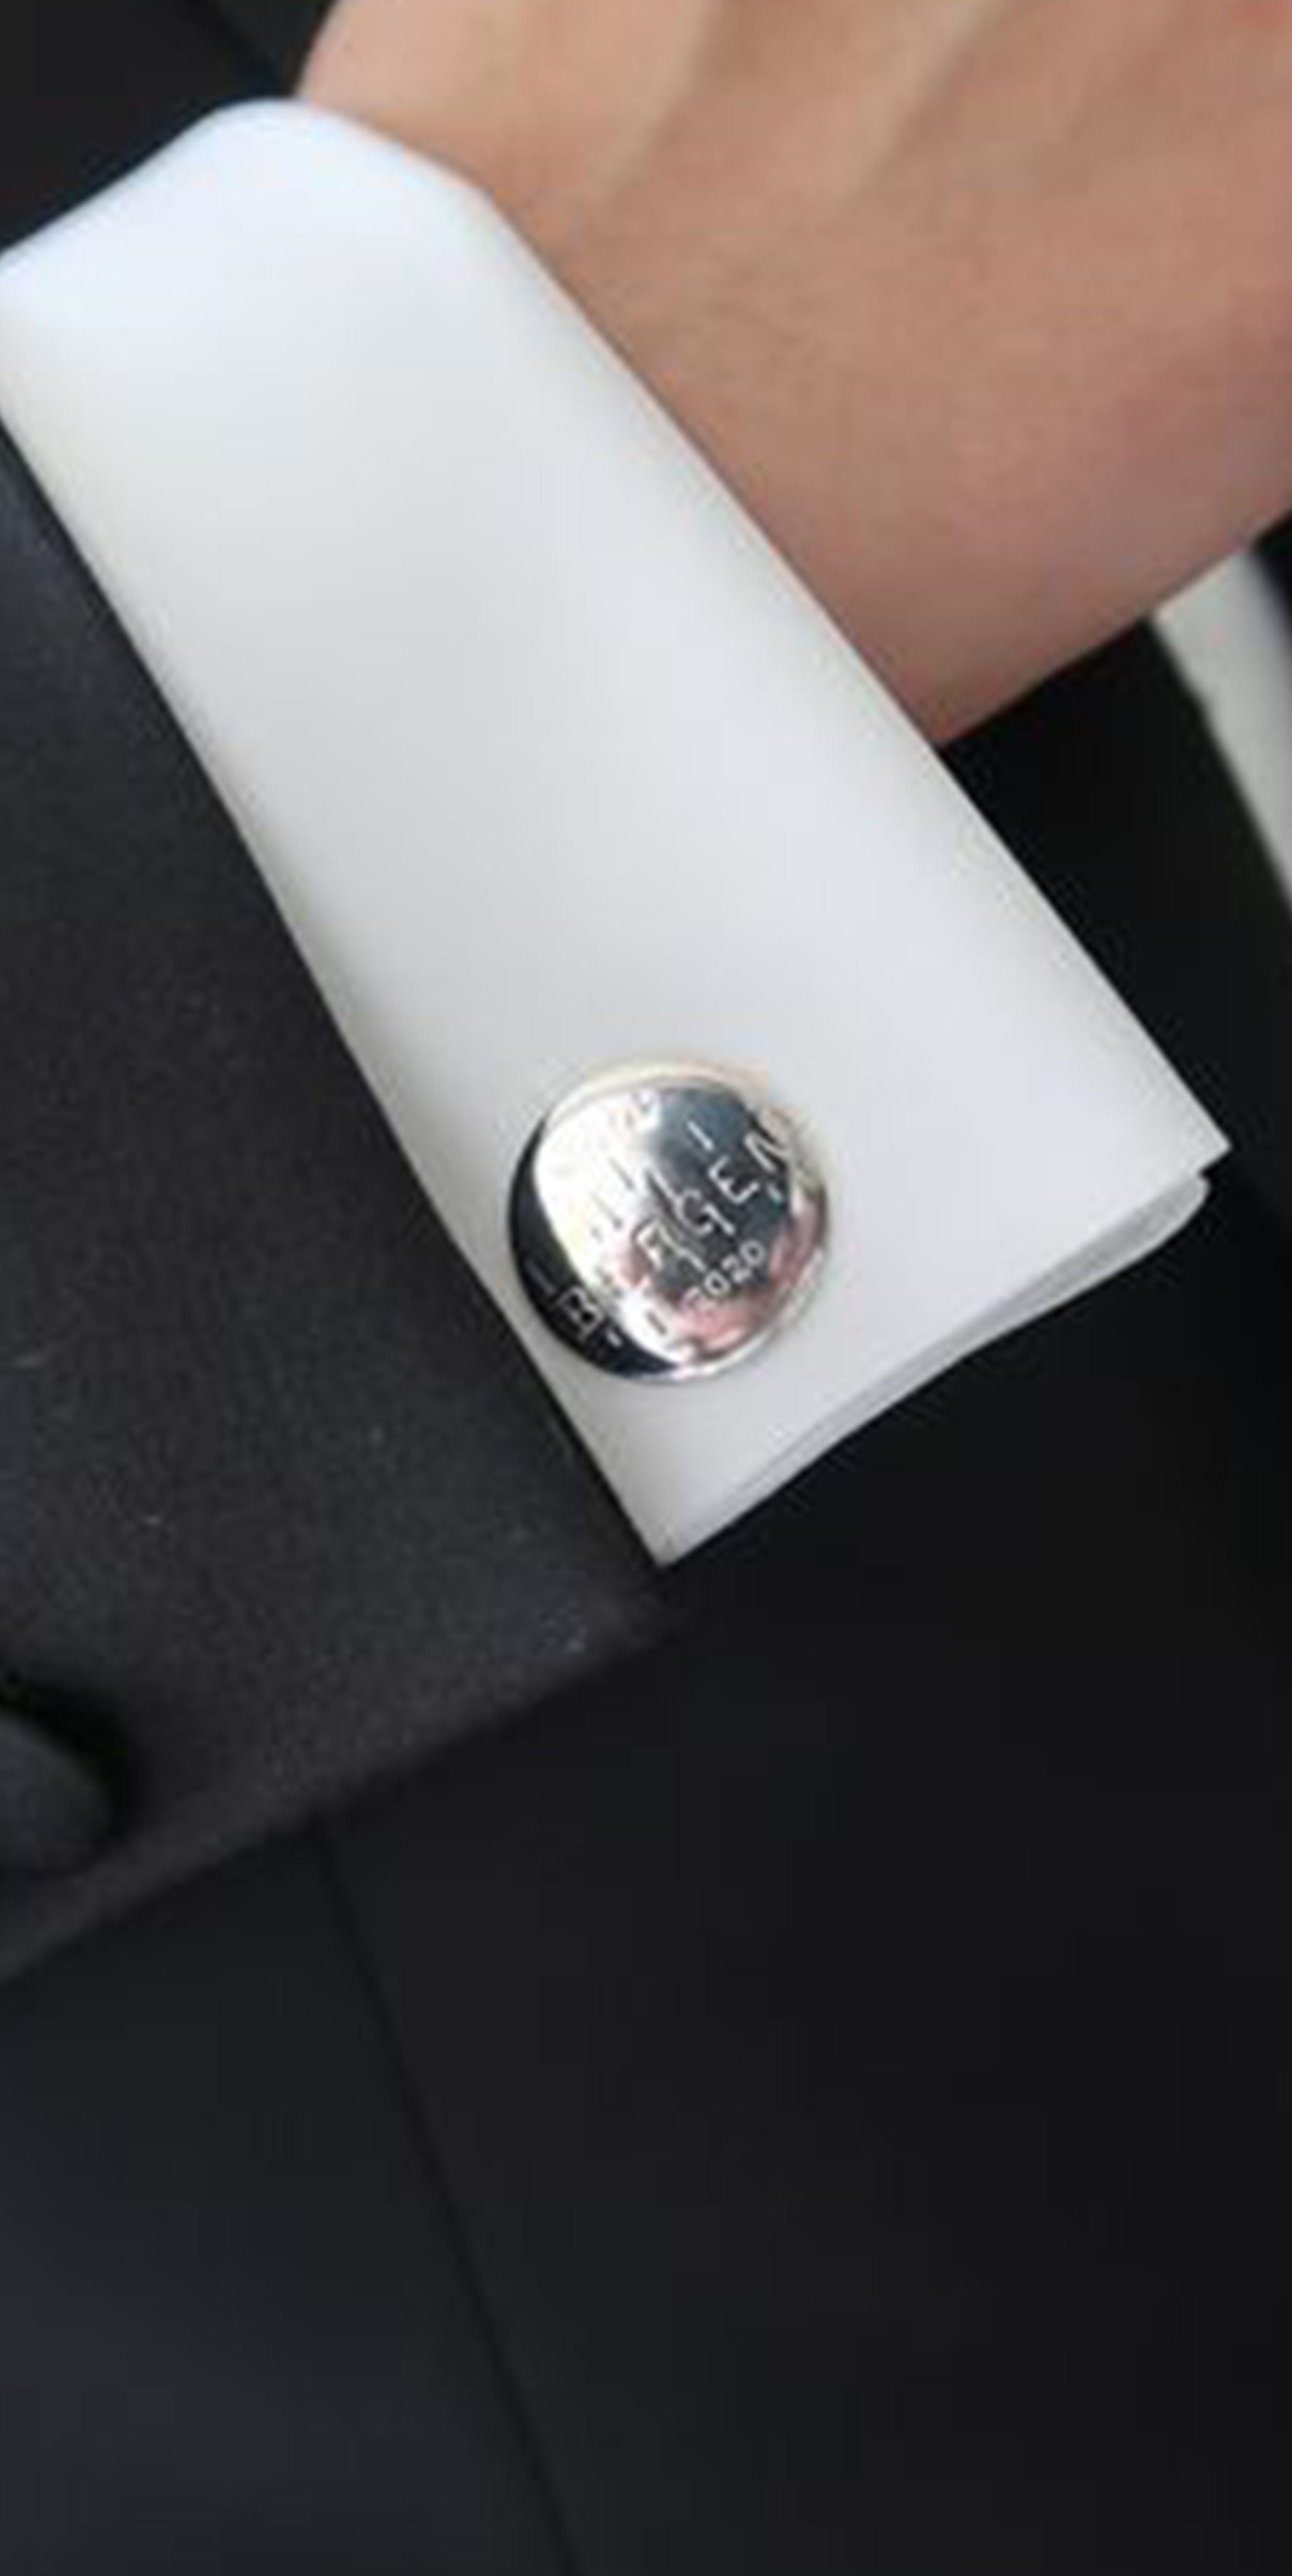 Cufflinks with official 950th anniversary logo